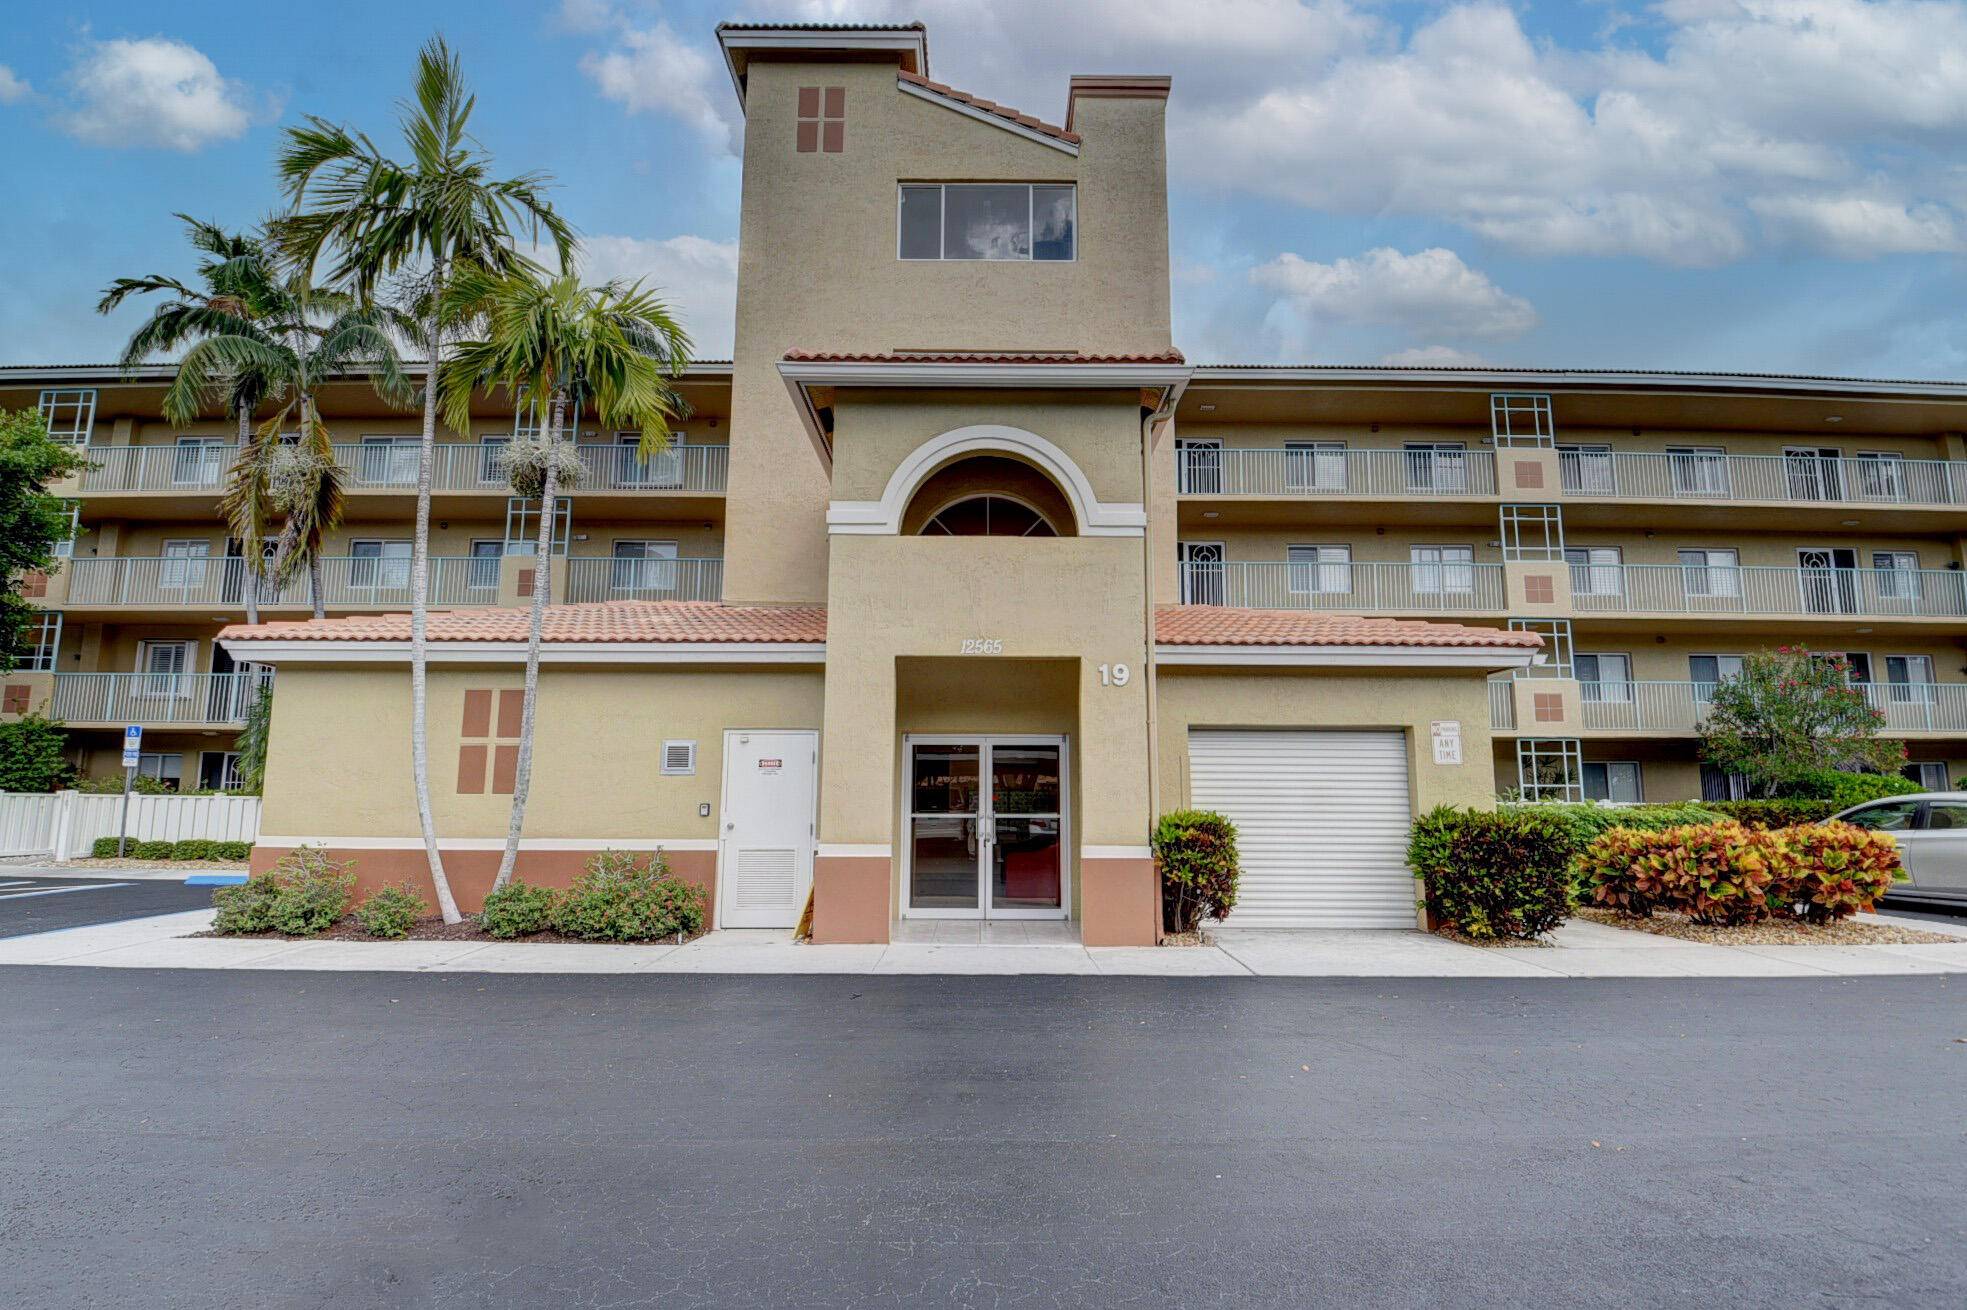 VERY SPACIOUS 3 BEDROOM, 2 BATHROOM PENTHOUSE UNIT LOCATED IN THE MUCH DESIRED CORAL LAKES CONDO COMMUNITY.